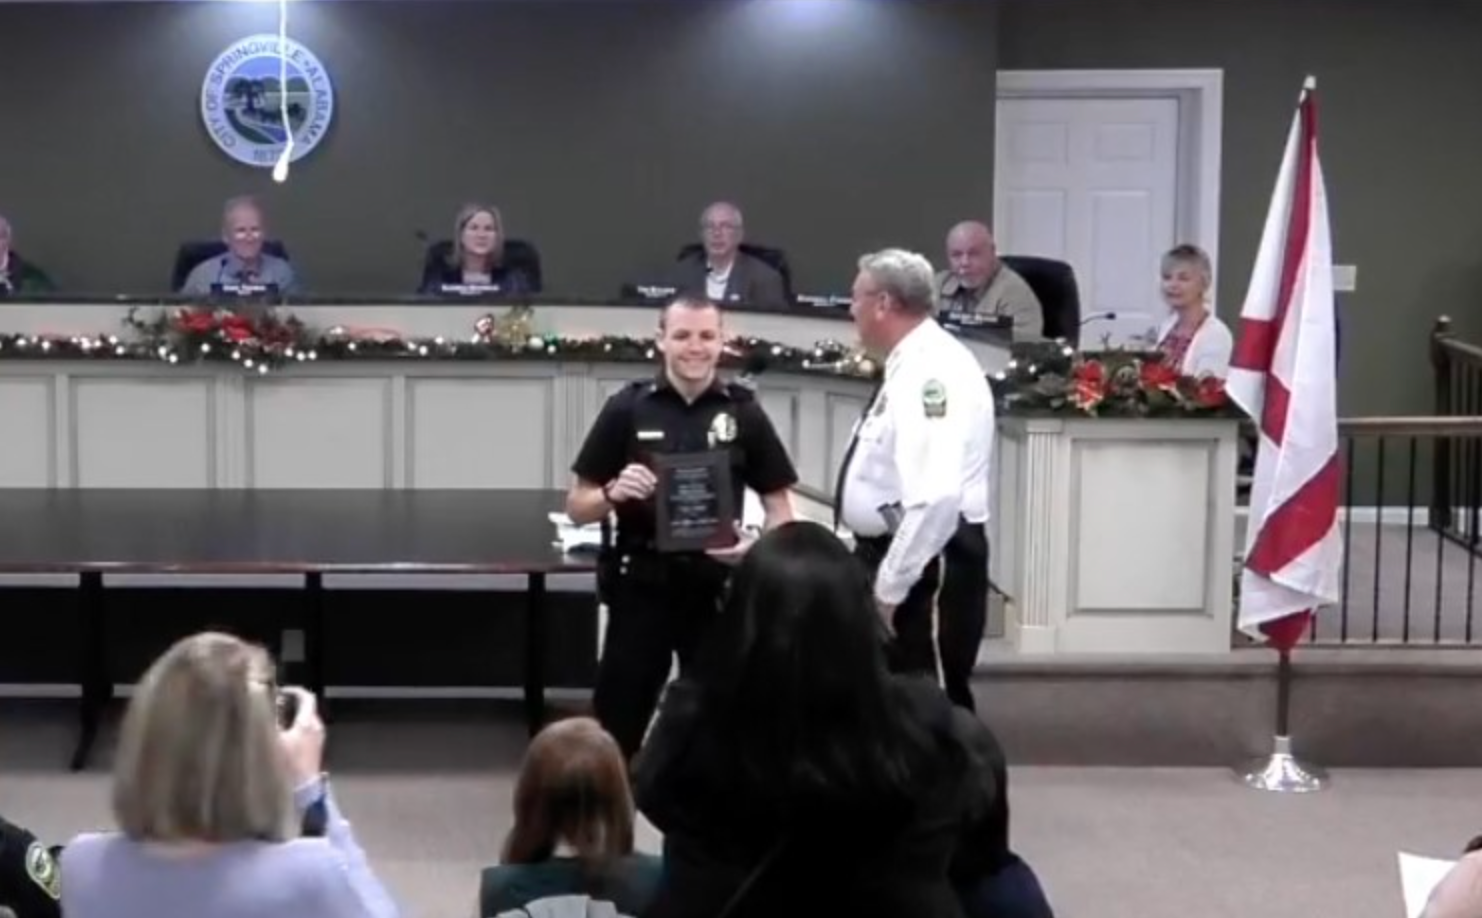 Springville honors two police officers, council considers new trash collection contract